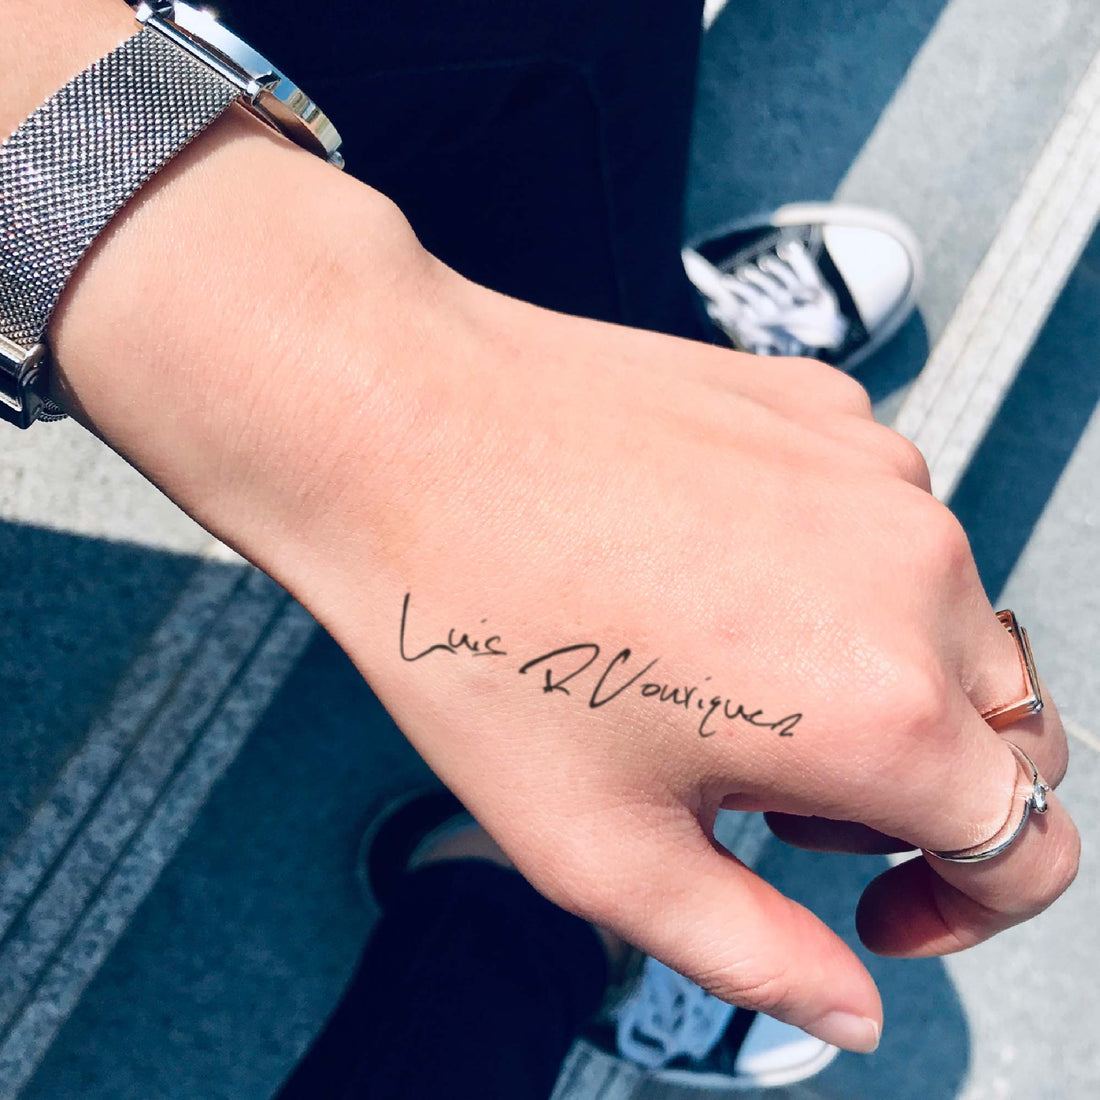 Luis R Conriquez custom temporary tattoo sticker design idea inspiration meanings removal arm wrist hand words font name signature calligraphy lyrics tour concert outfits merch accessory gift souvenir costumes wear dress up code